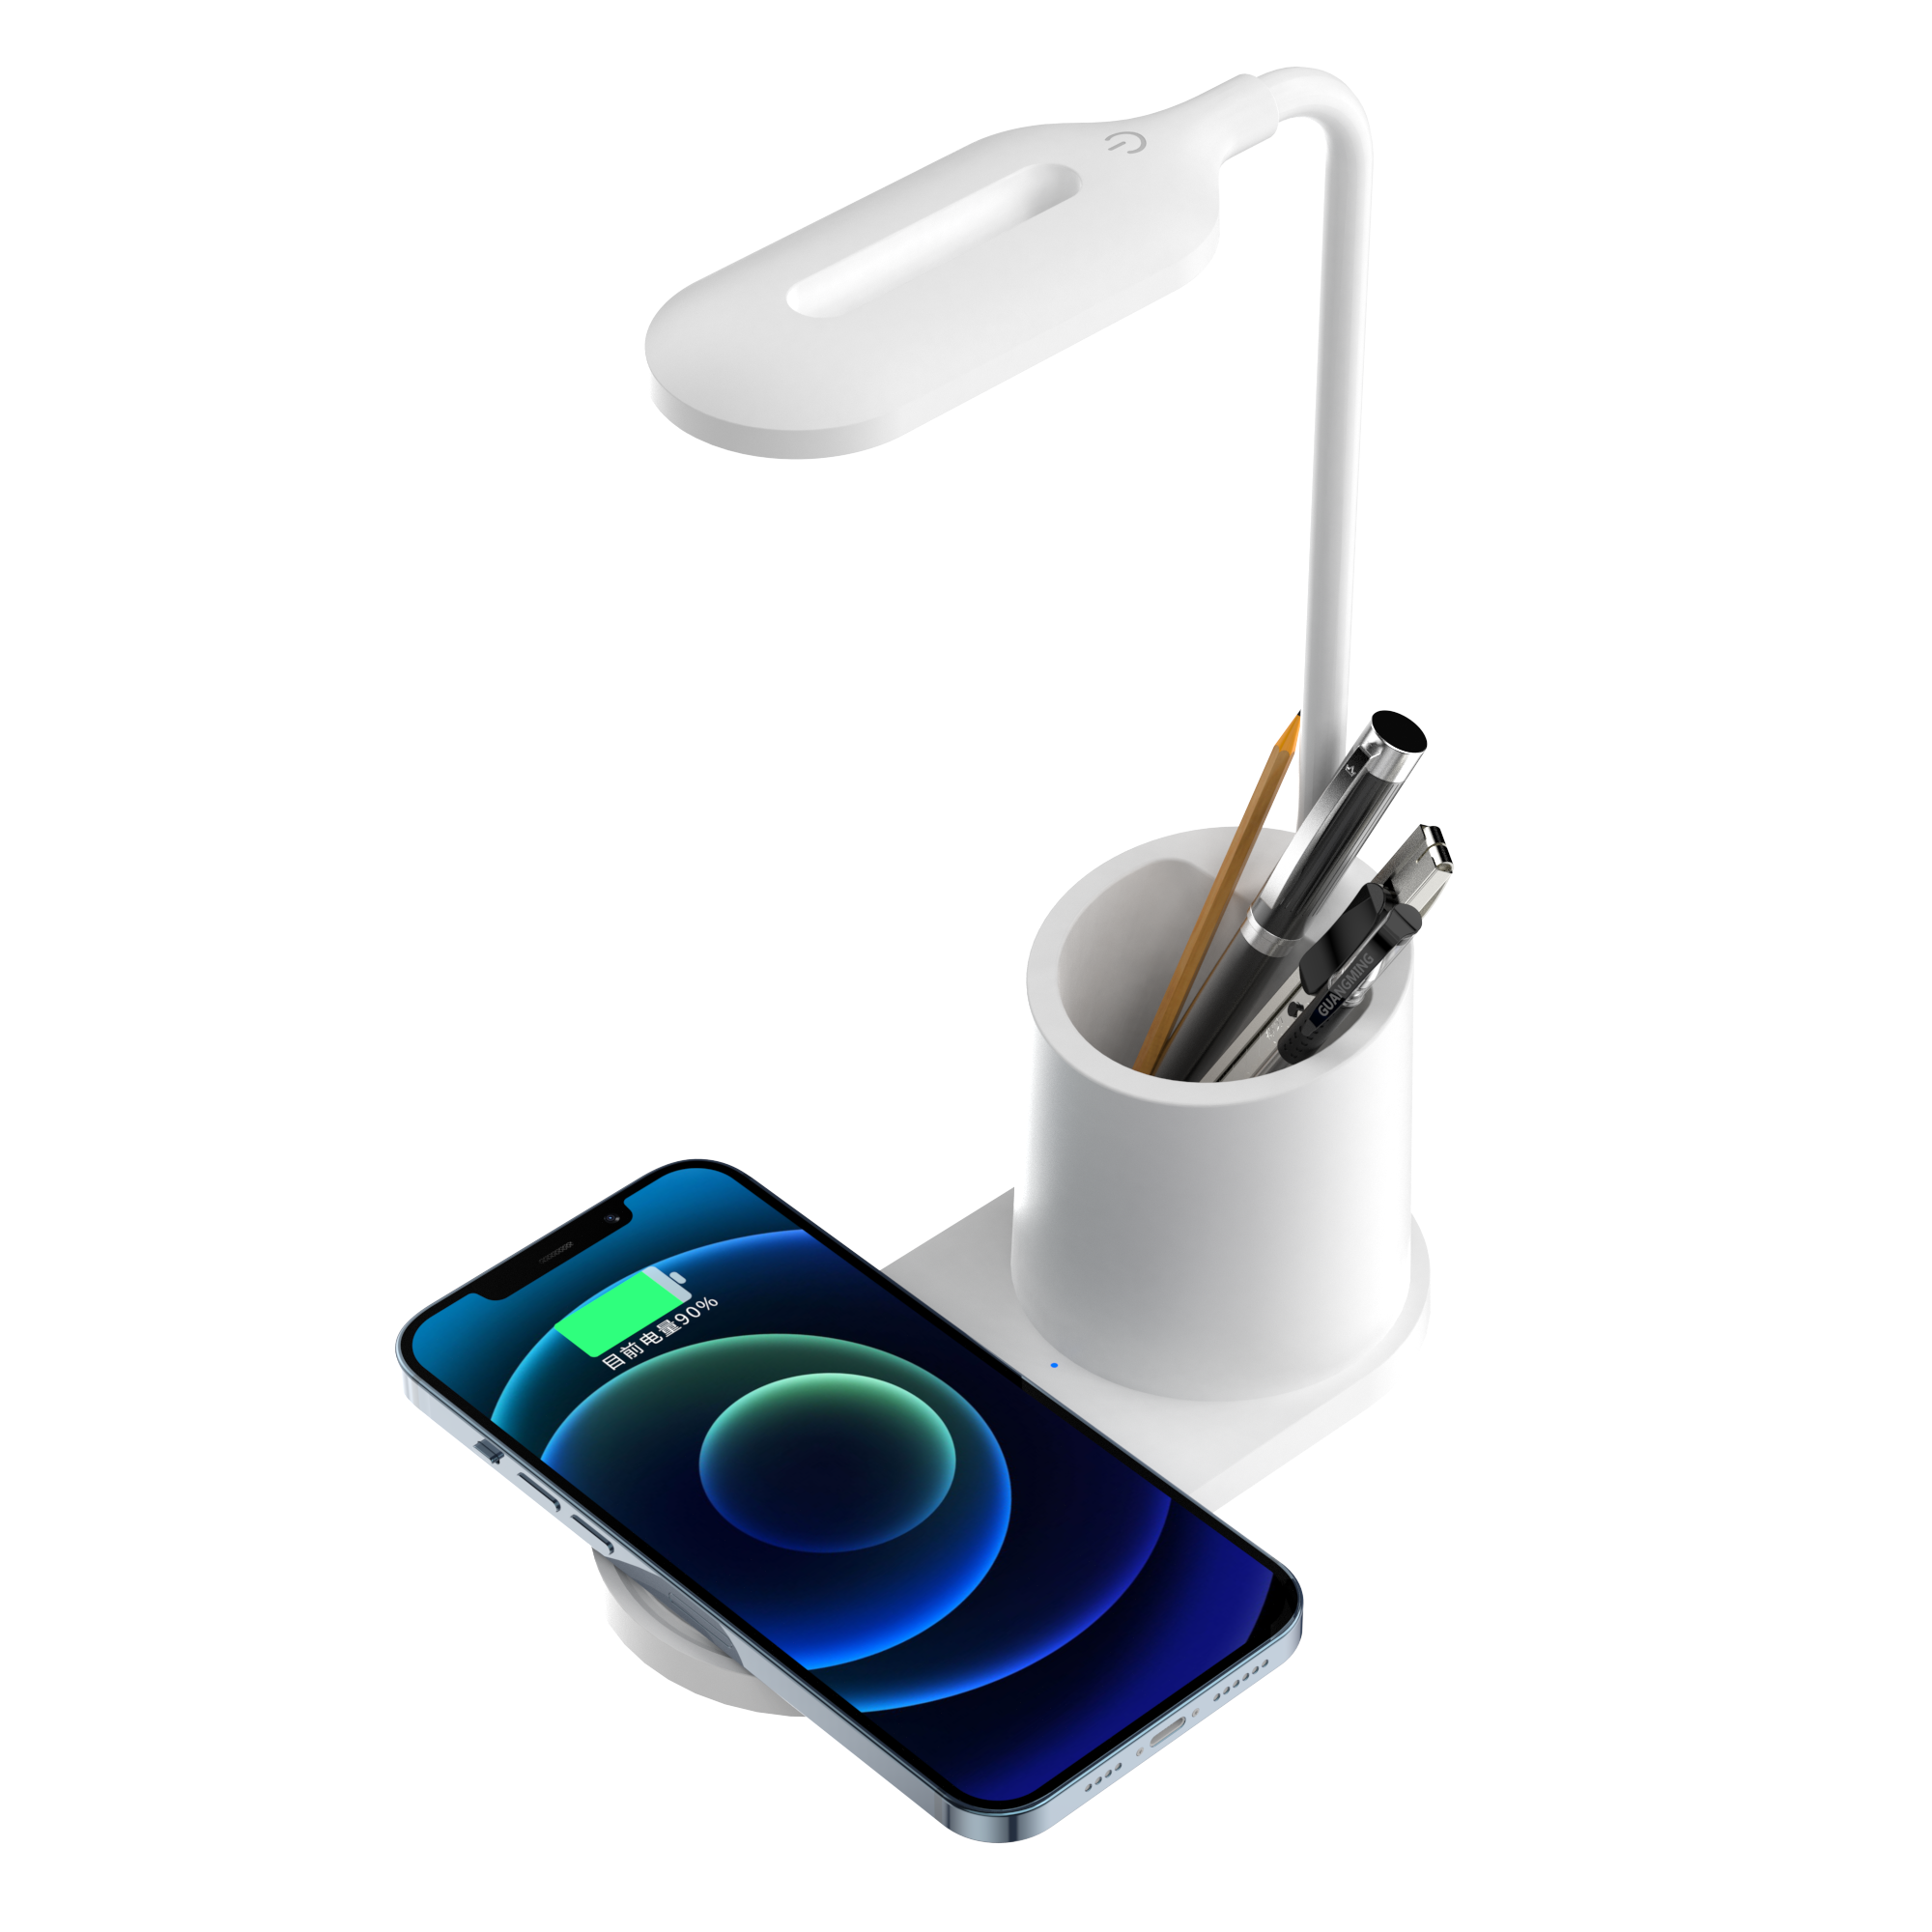 HHT513 Hot selling On Amazon Led Table Lamp With Holder Wireless Charger Night Light 3 in 1 Office Lamp Touch Switch For study